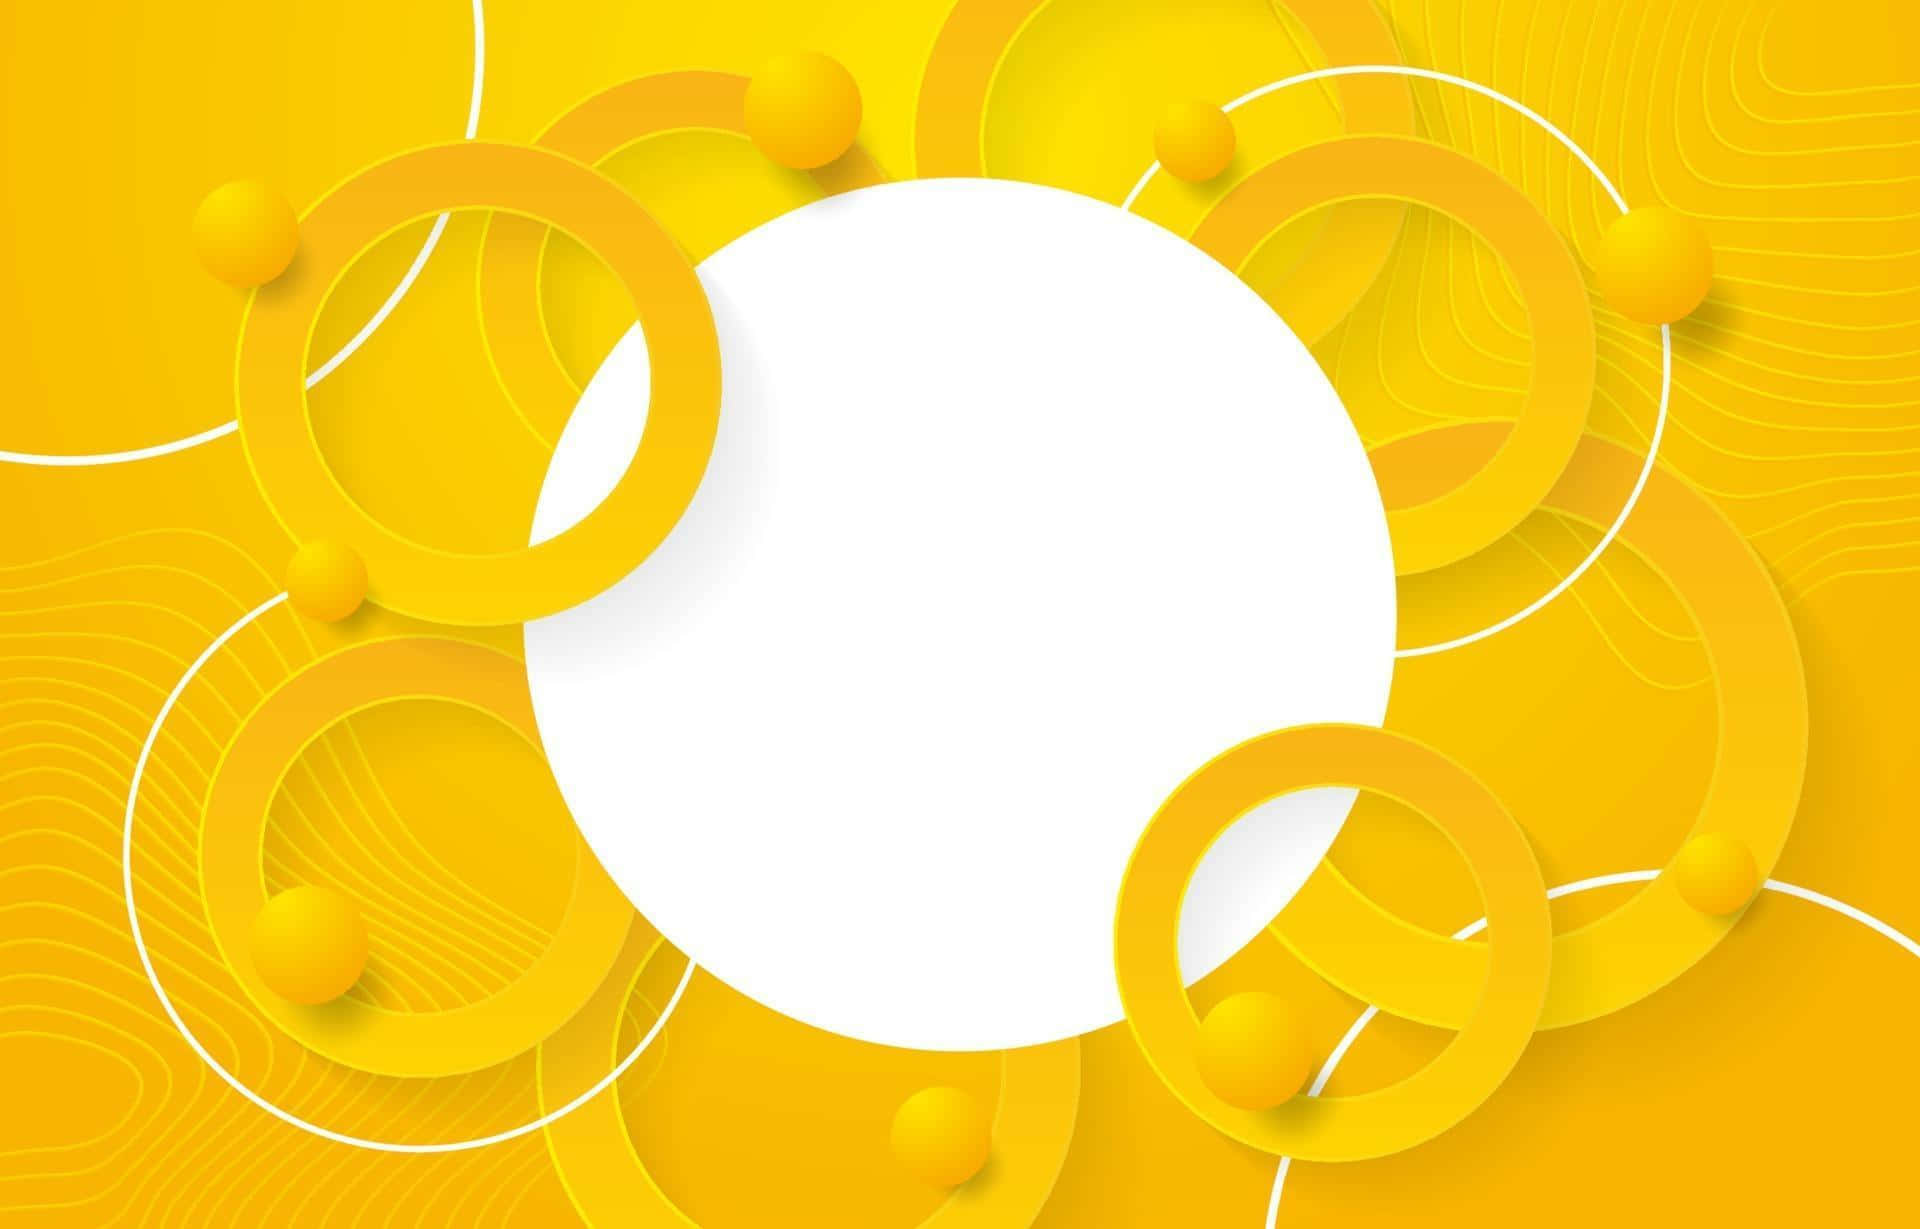 Vibrant Yellow Circle on Grey Gradient Background Wallpaper